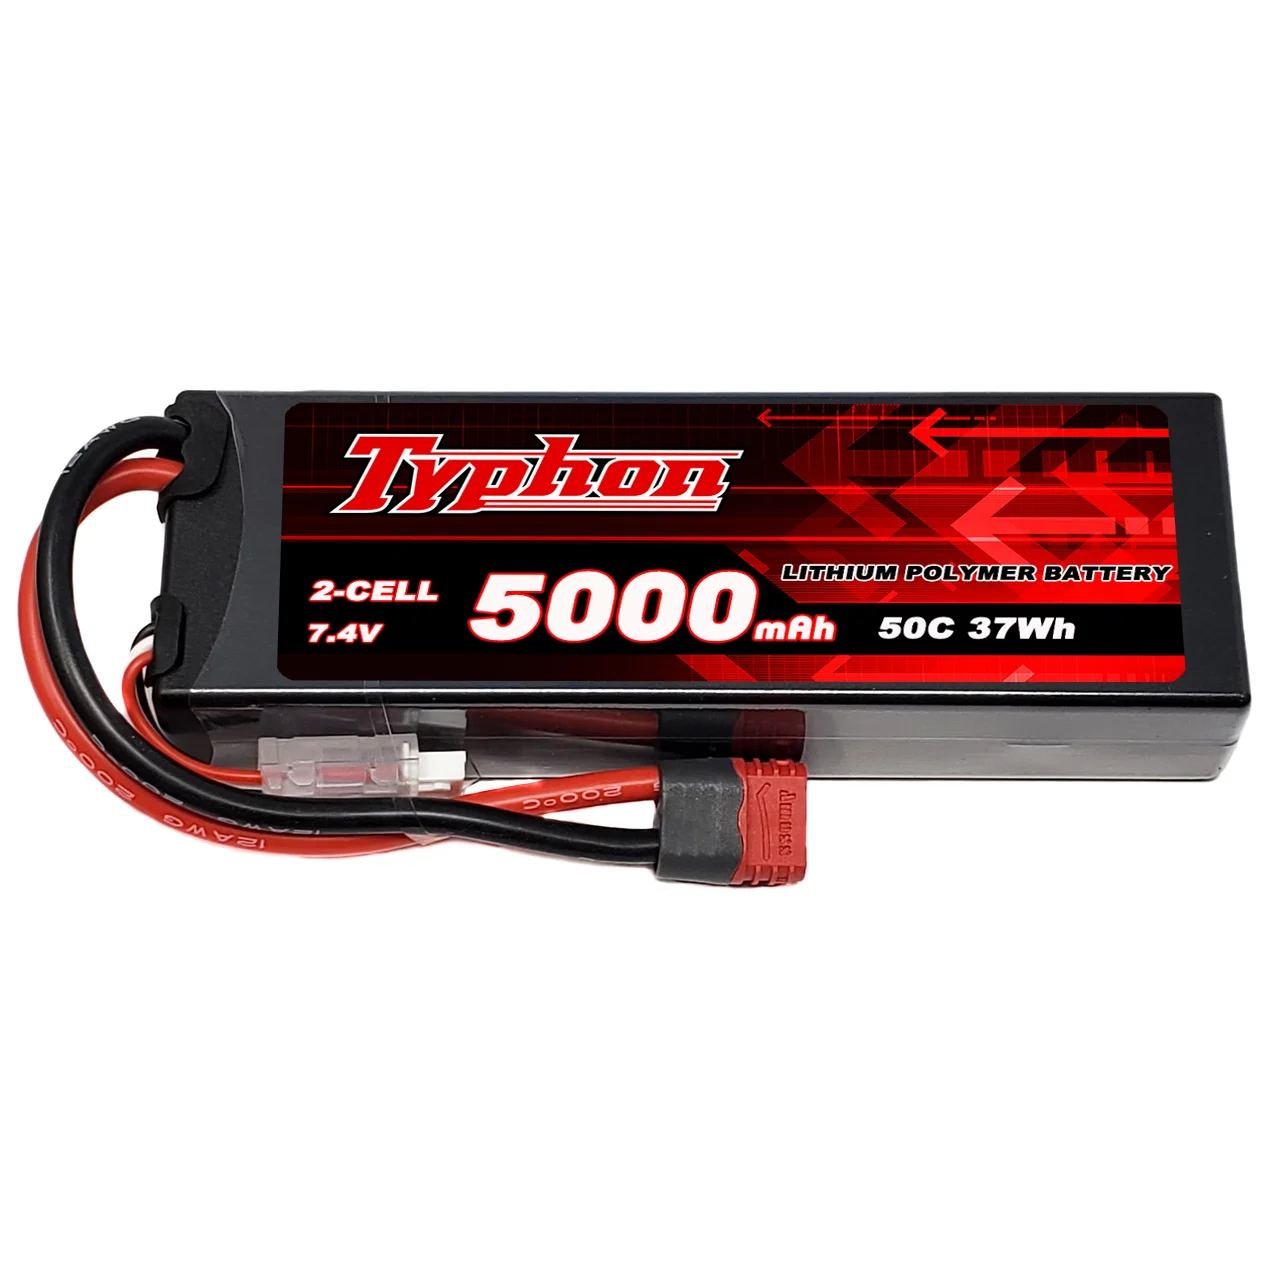 Wholesale 2S Lipo Battery 50C RC Lipo Batteries Hard Case with Deans Plug for 1/8 1/10 Vehicles Car Trucks Airplane Boats From m.alibaba.com